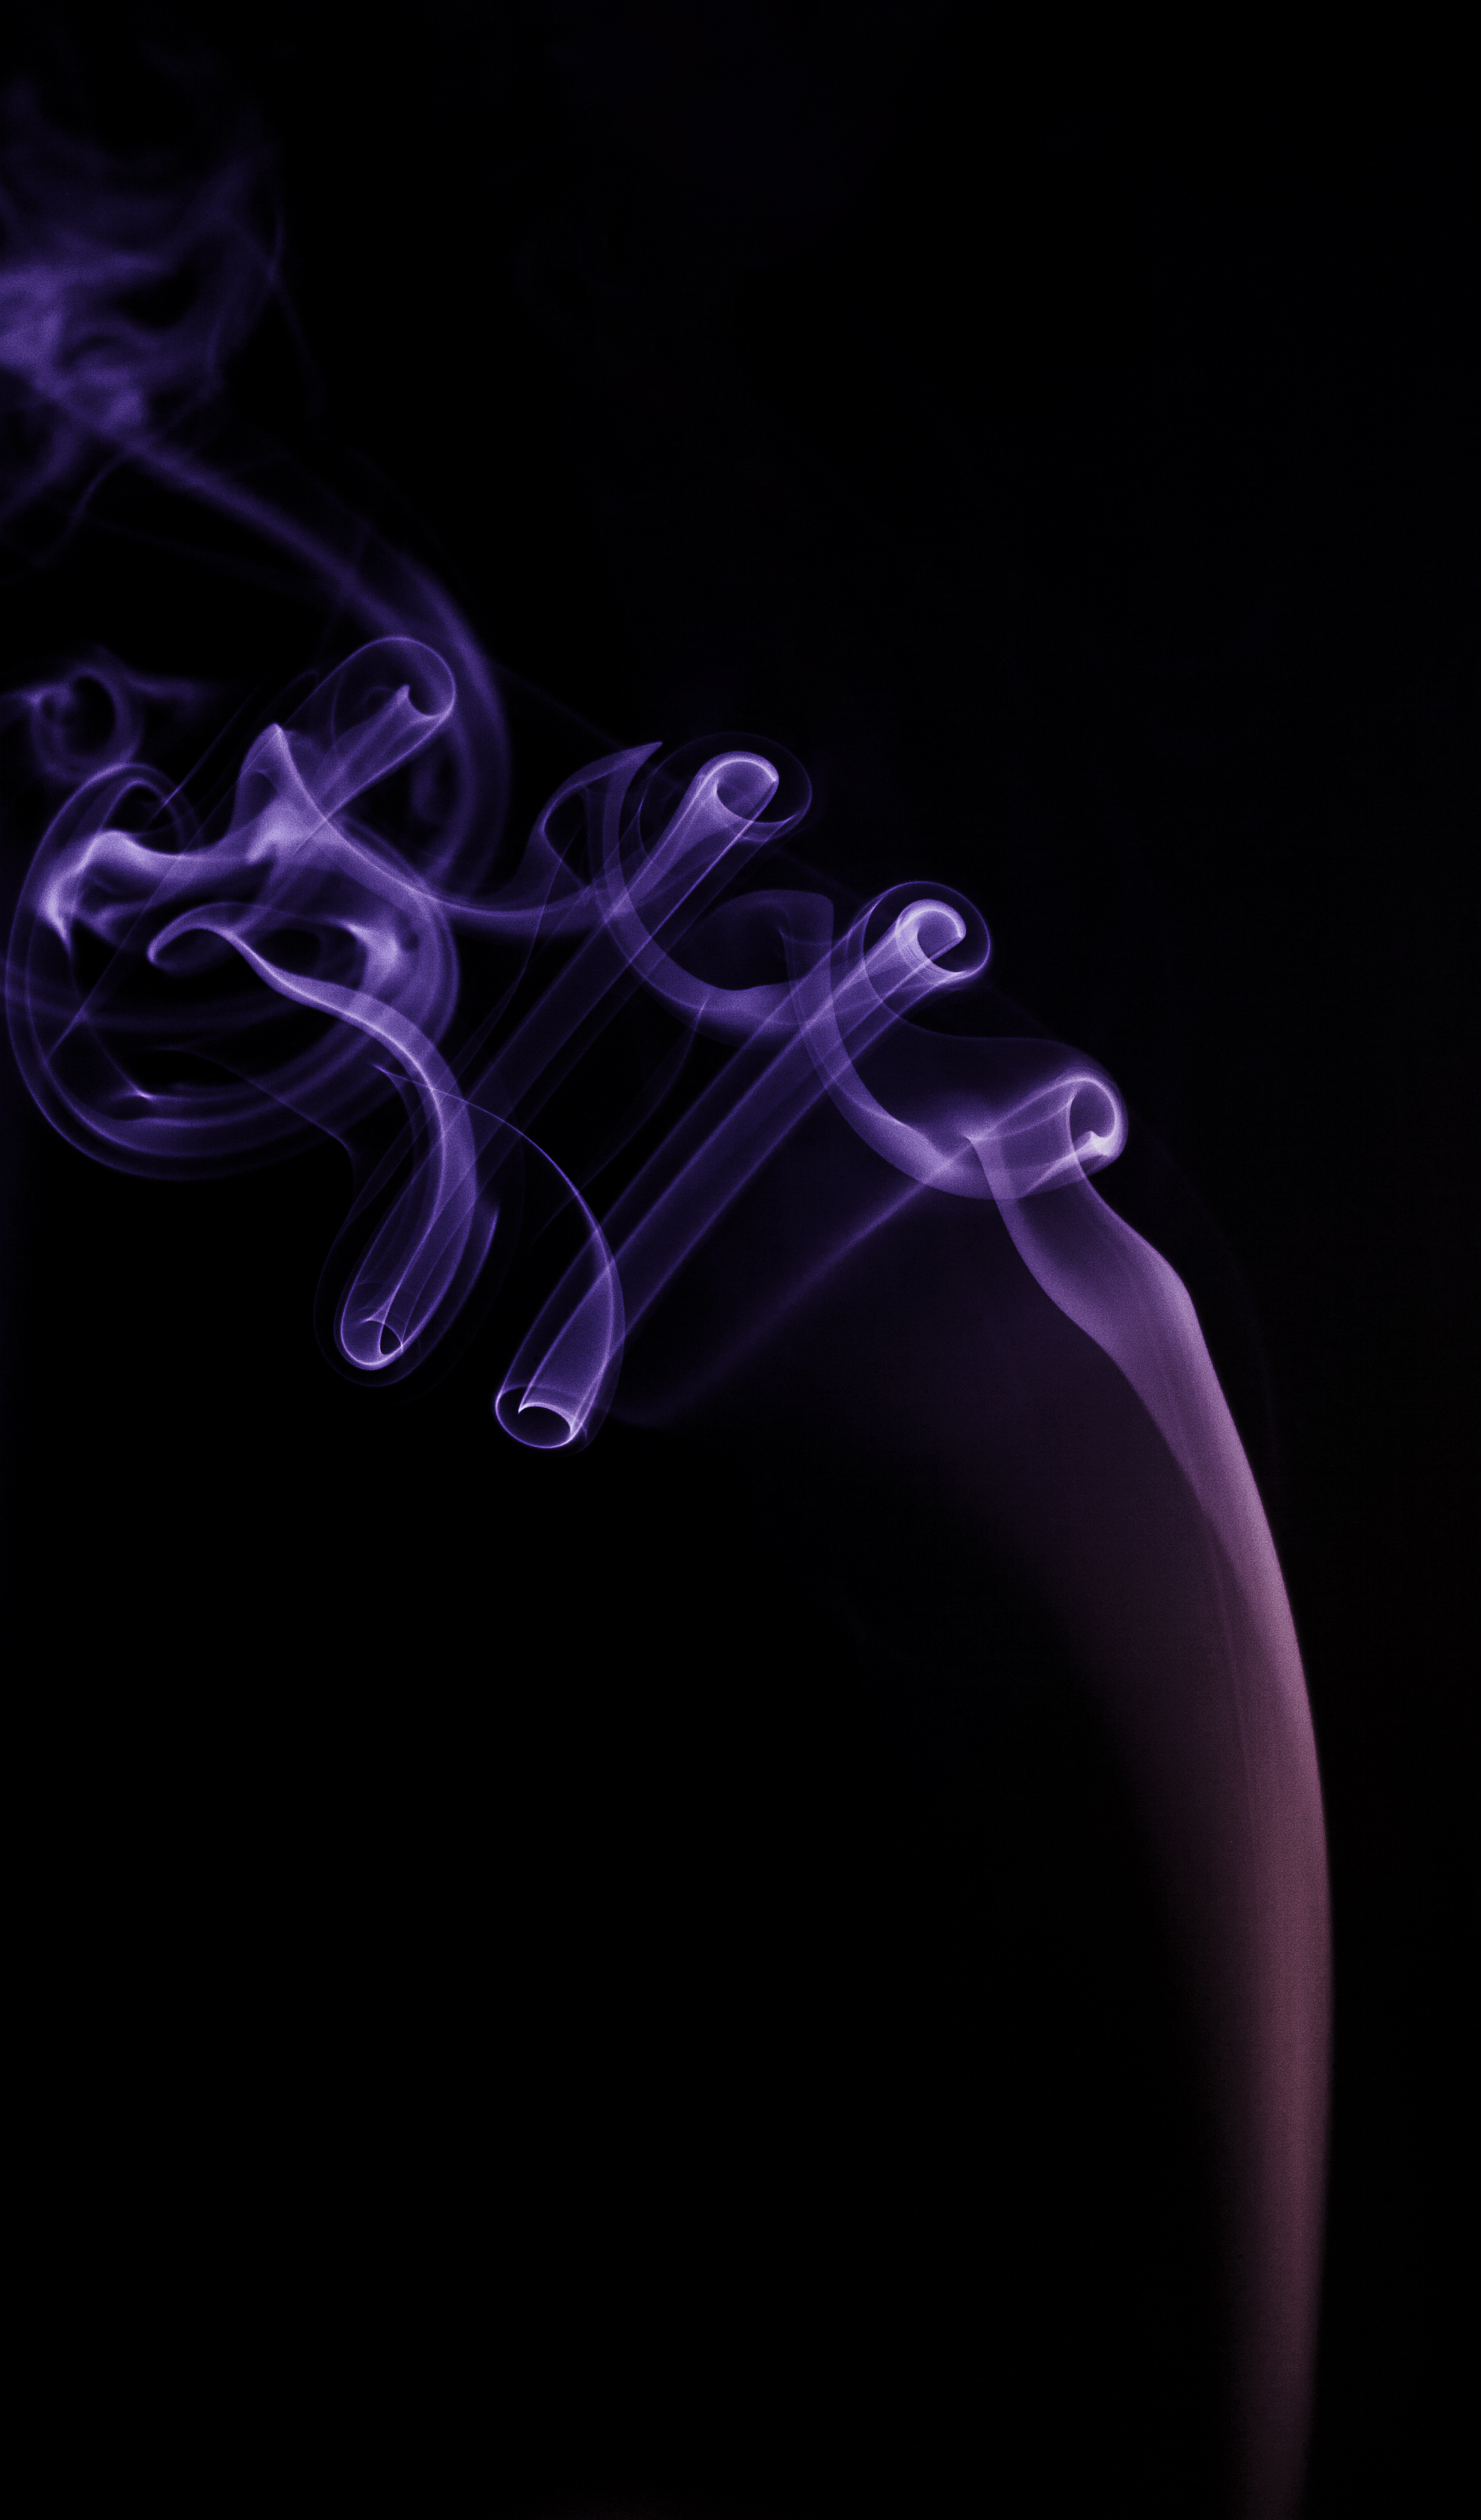 115237 3840x2160 PC pictures for free, download twisting, purple, violet, black 3840x2160 wallpapers on your desktop